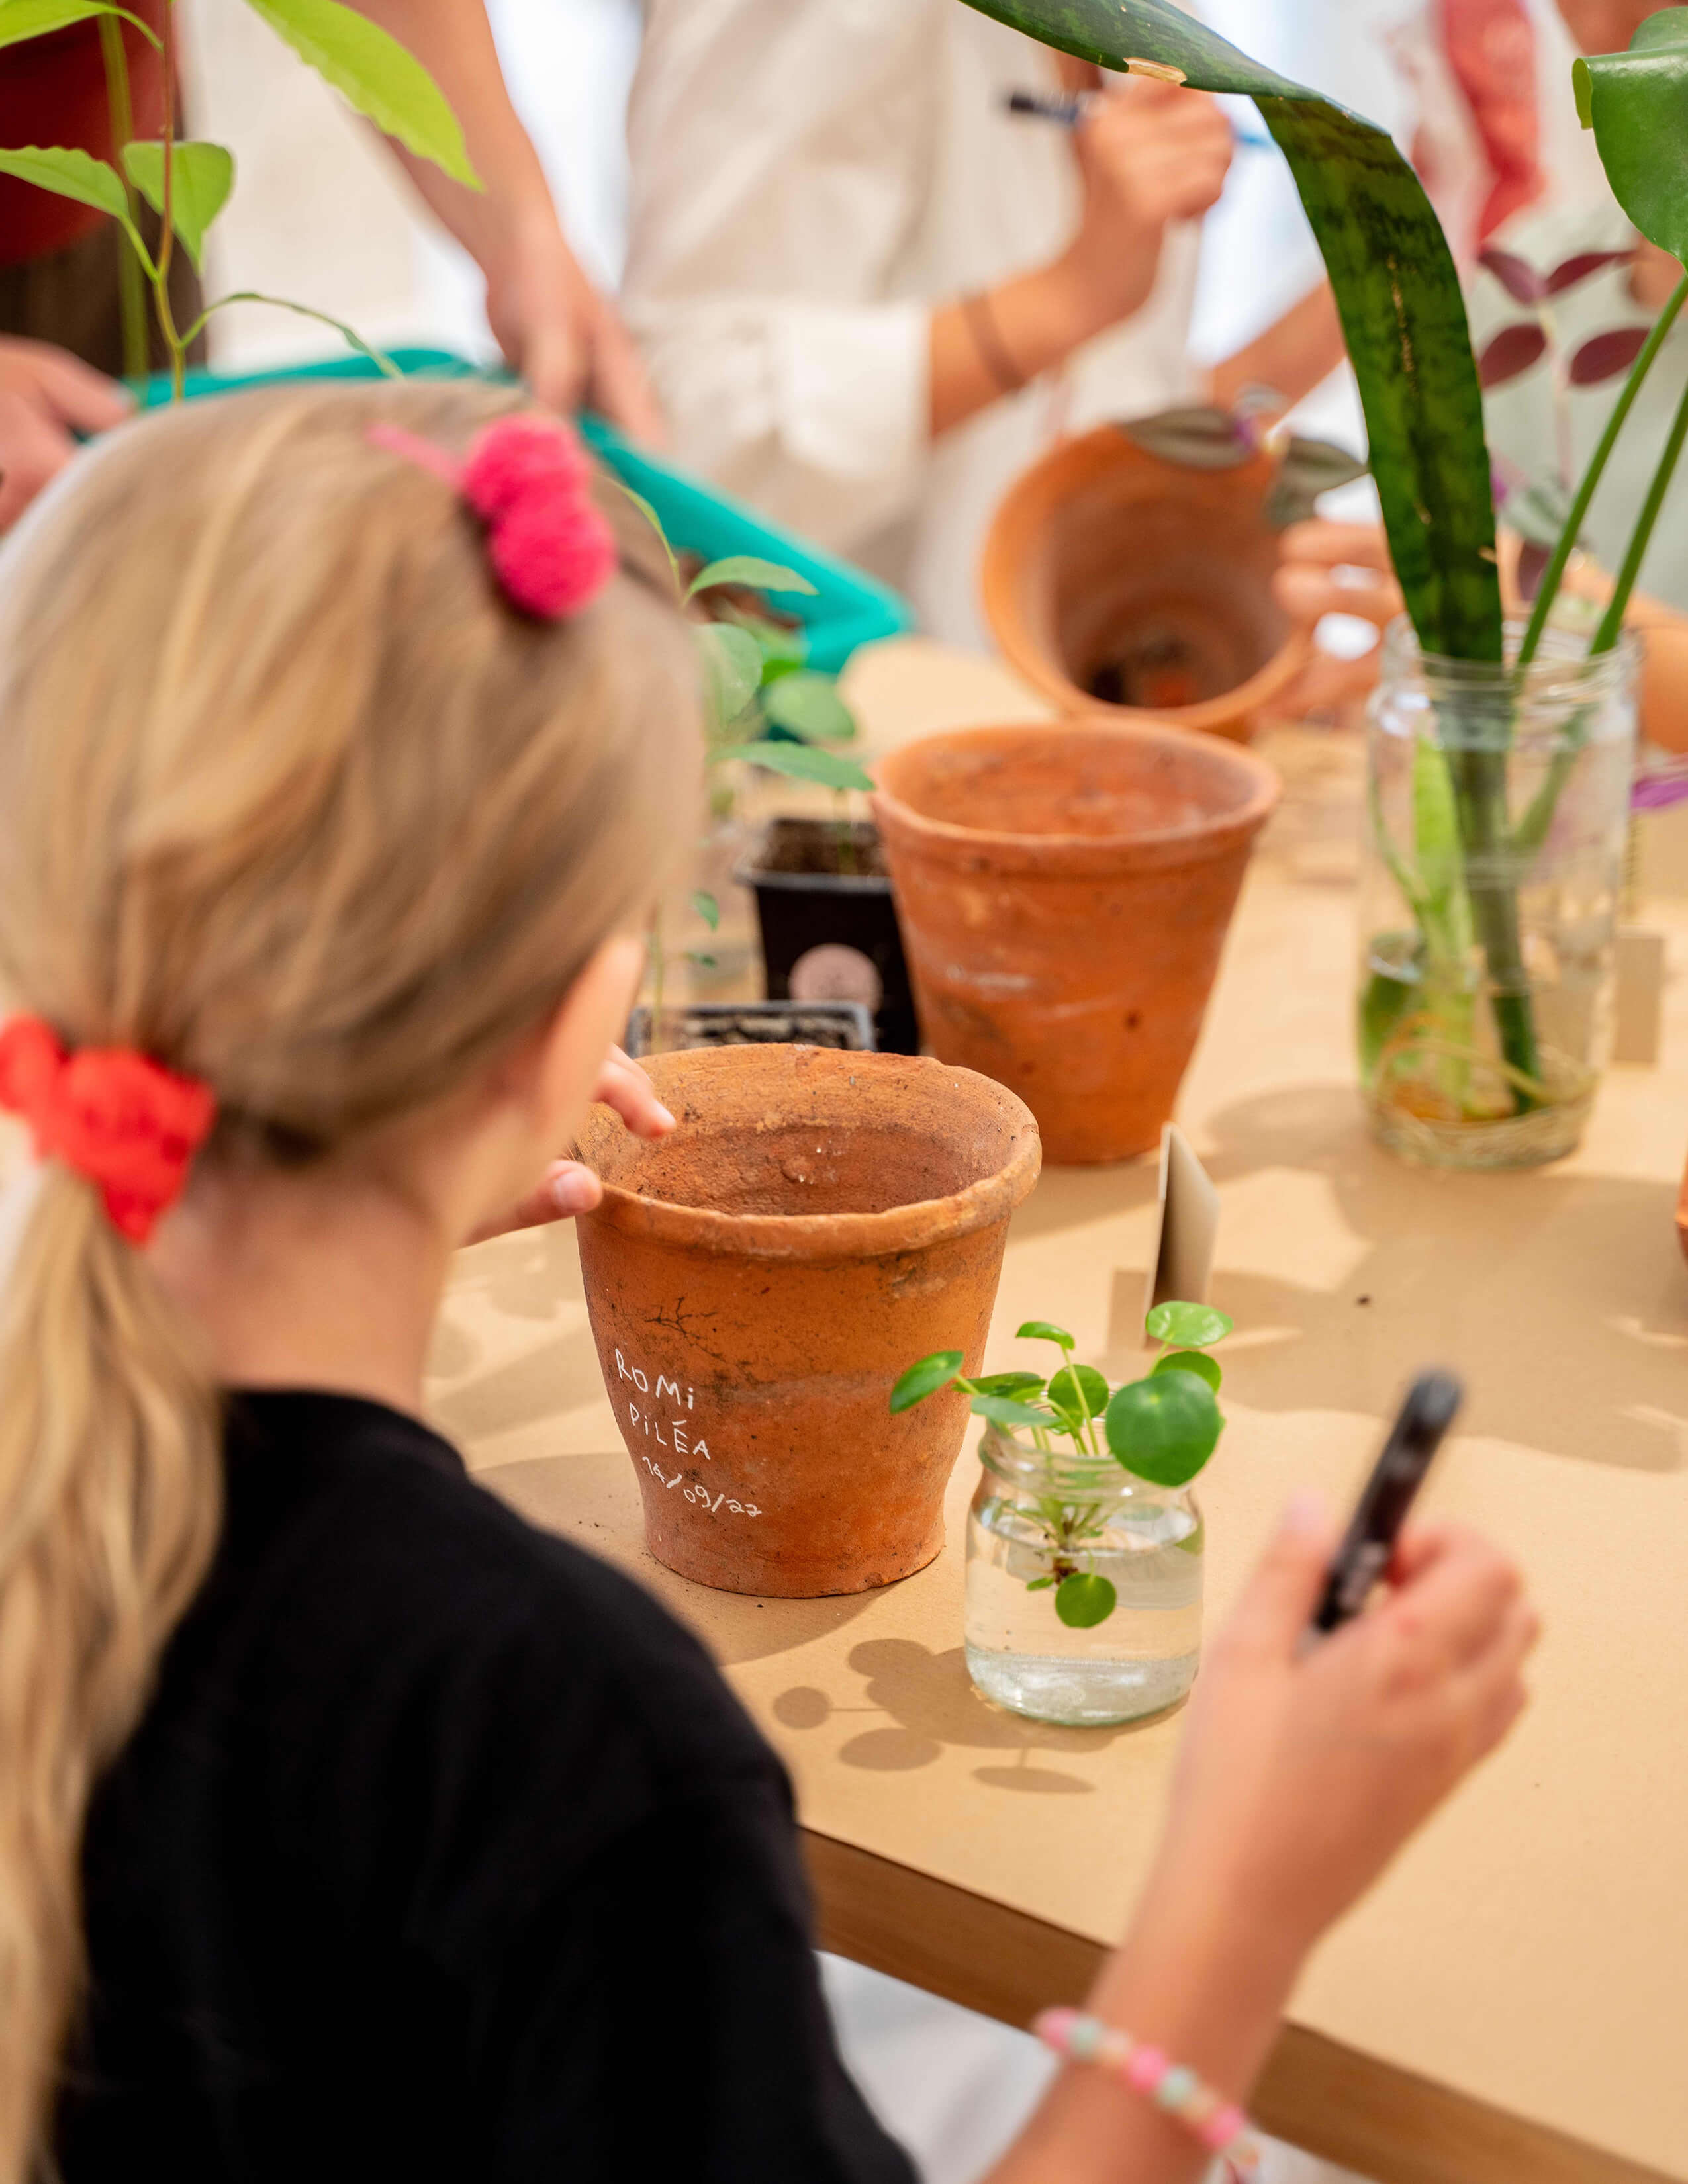 Three terracotta-like pots are on the table and some plants grow from glassware that can see through their roots.